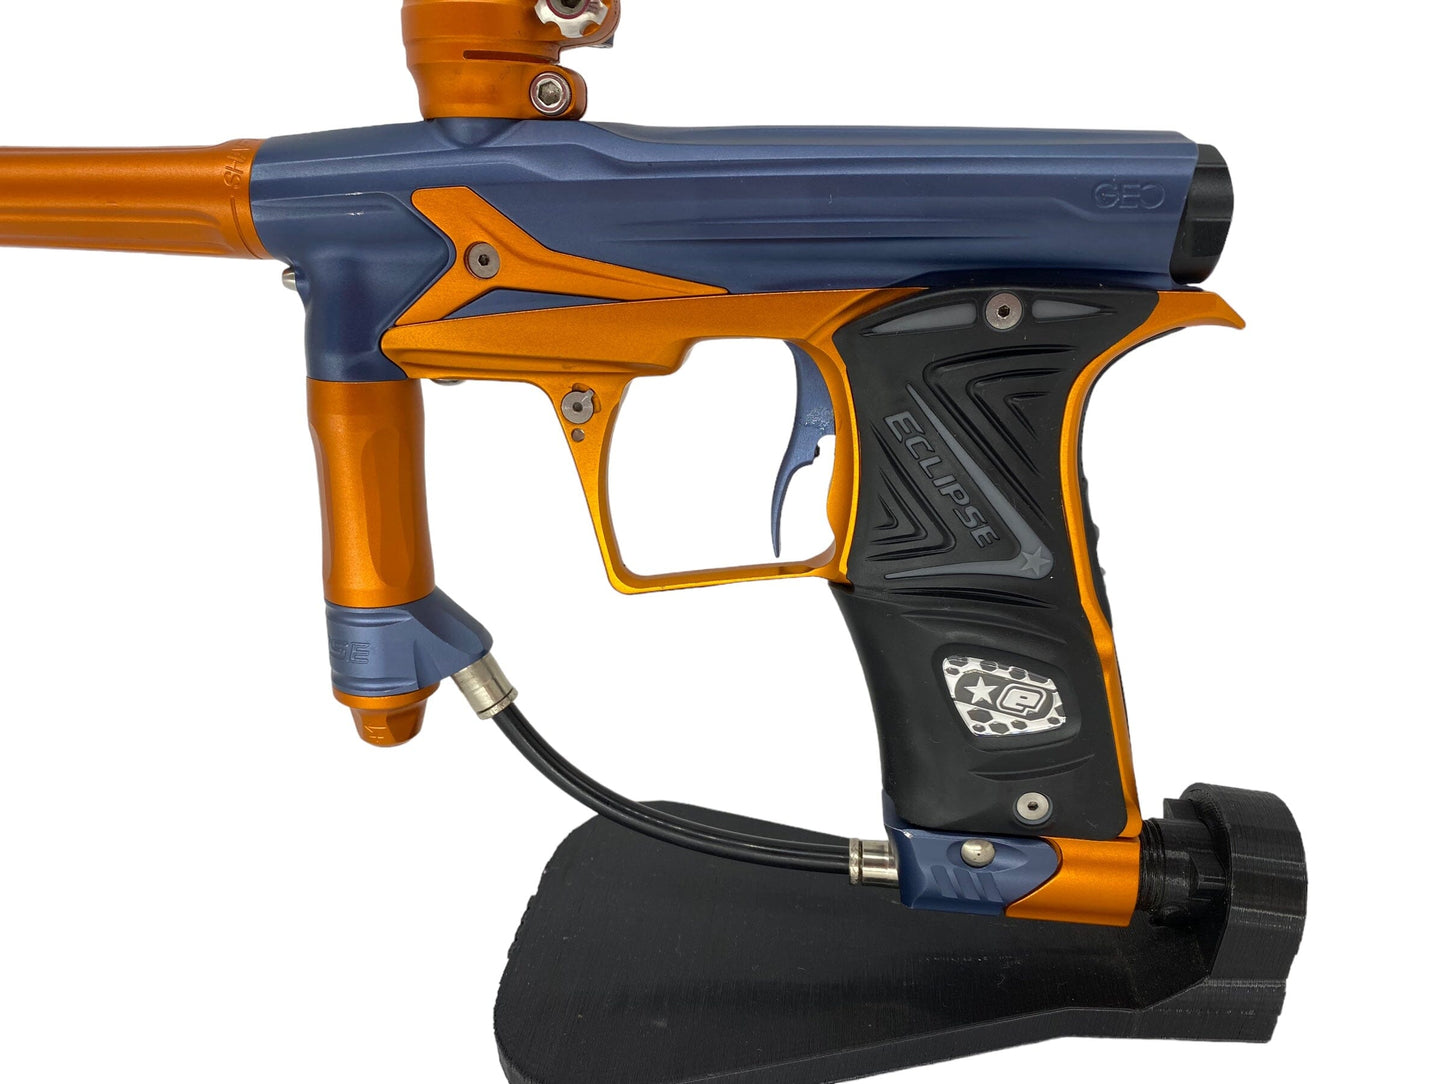 Used Planet Eclipse Geo 3 Paintball Gun Paintball Gun from CPXBrosPaintball Buy/Sell/Trade Paintball Markers, New Paintball Guns, Paintball Hoppers, Paintball Masks, and Hormesis Headbands